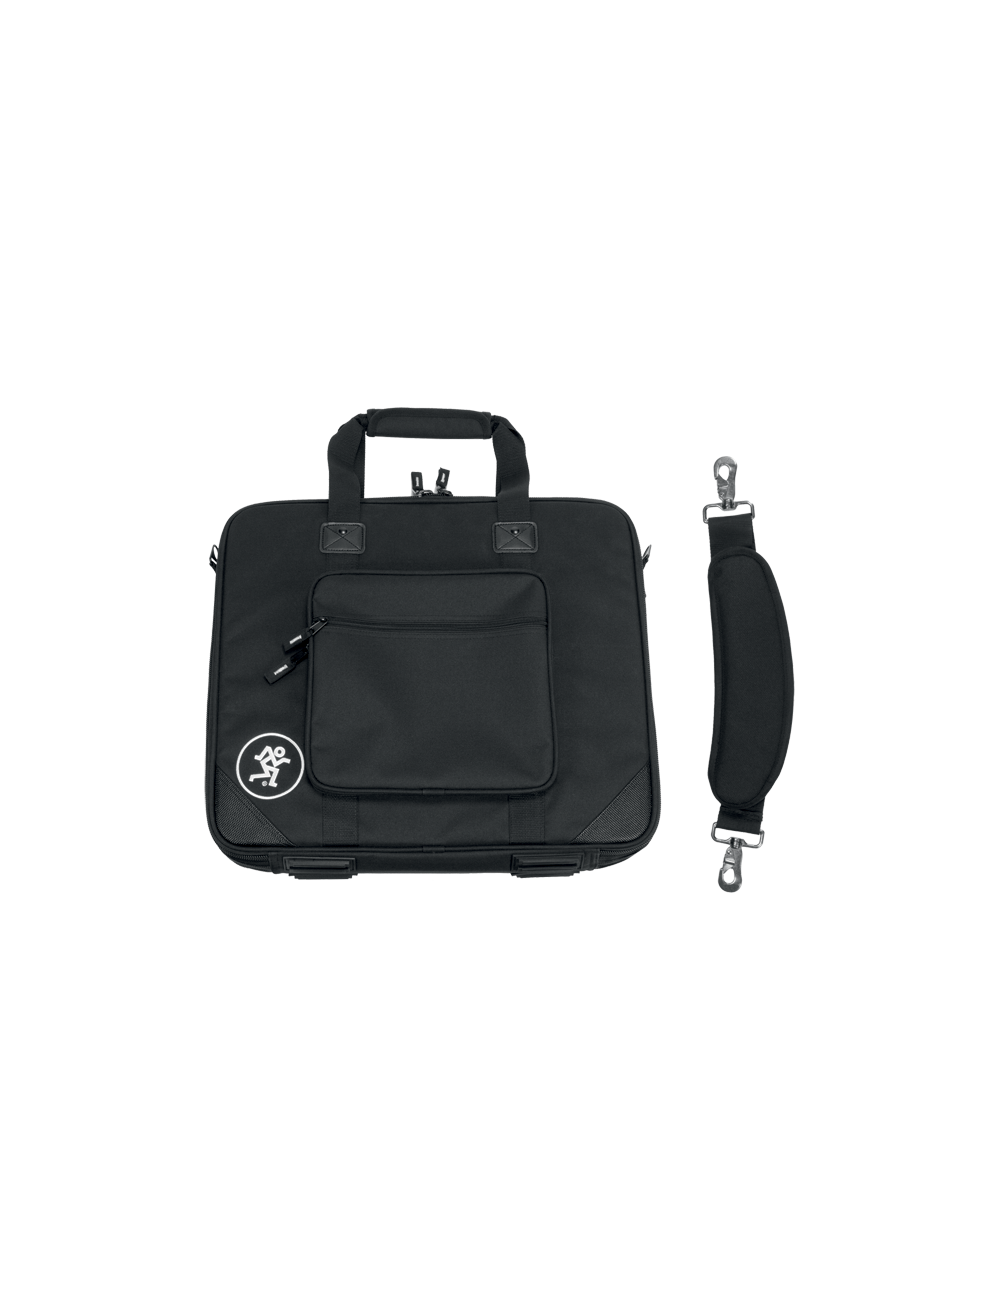 Carrying case for ProFX22